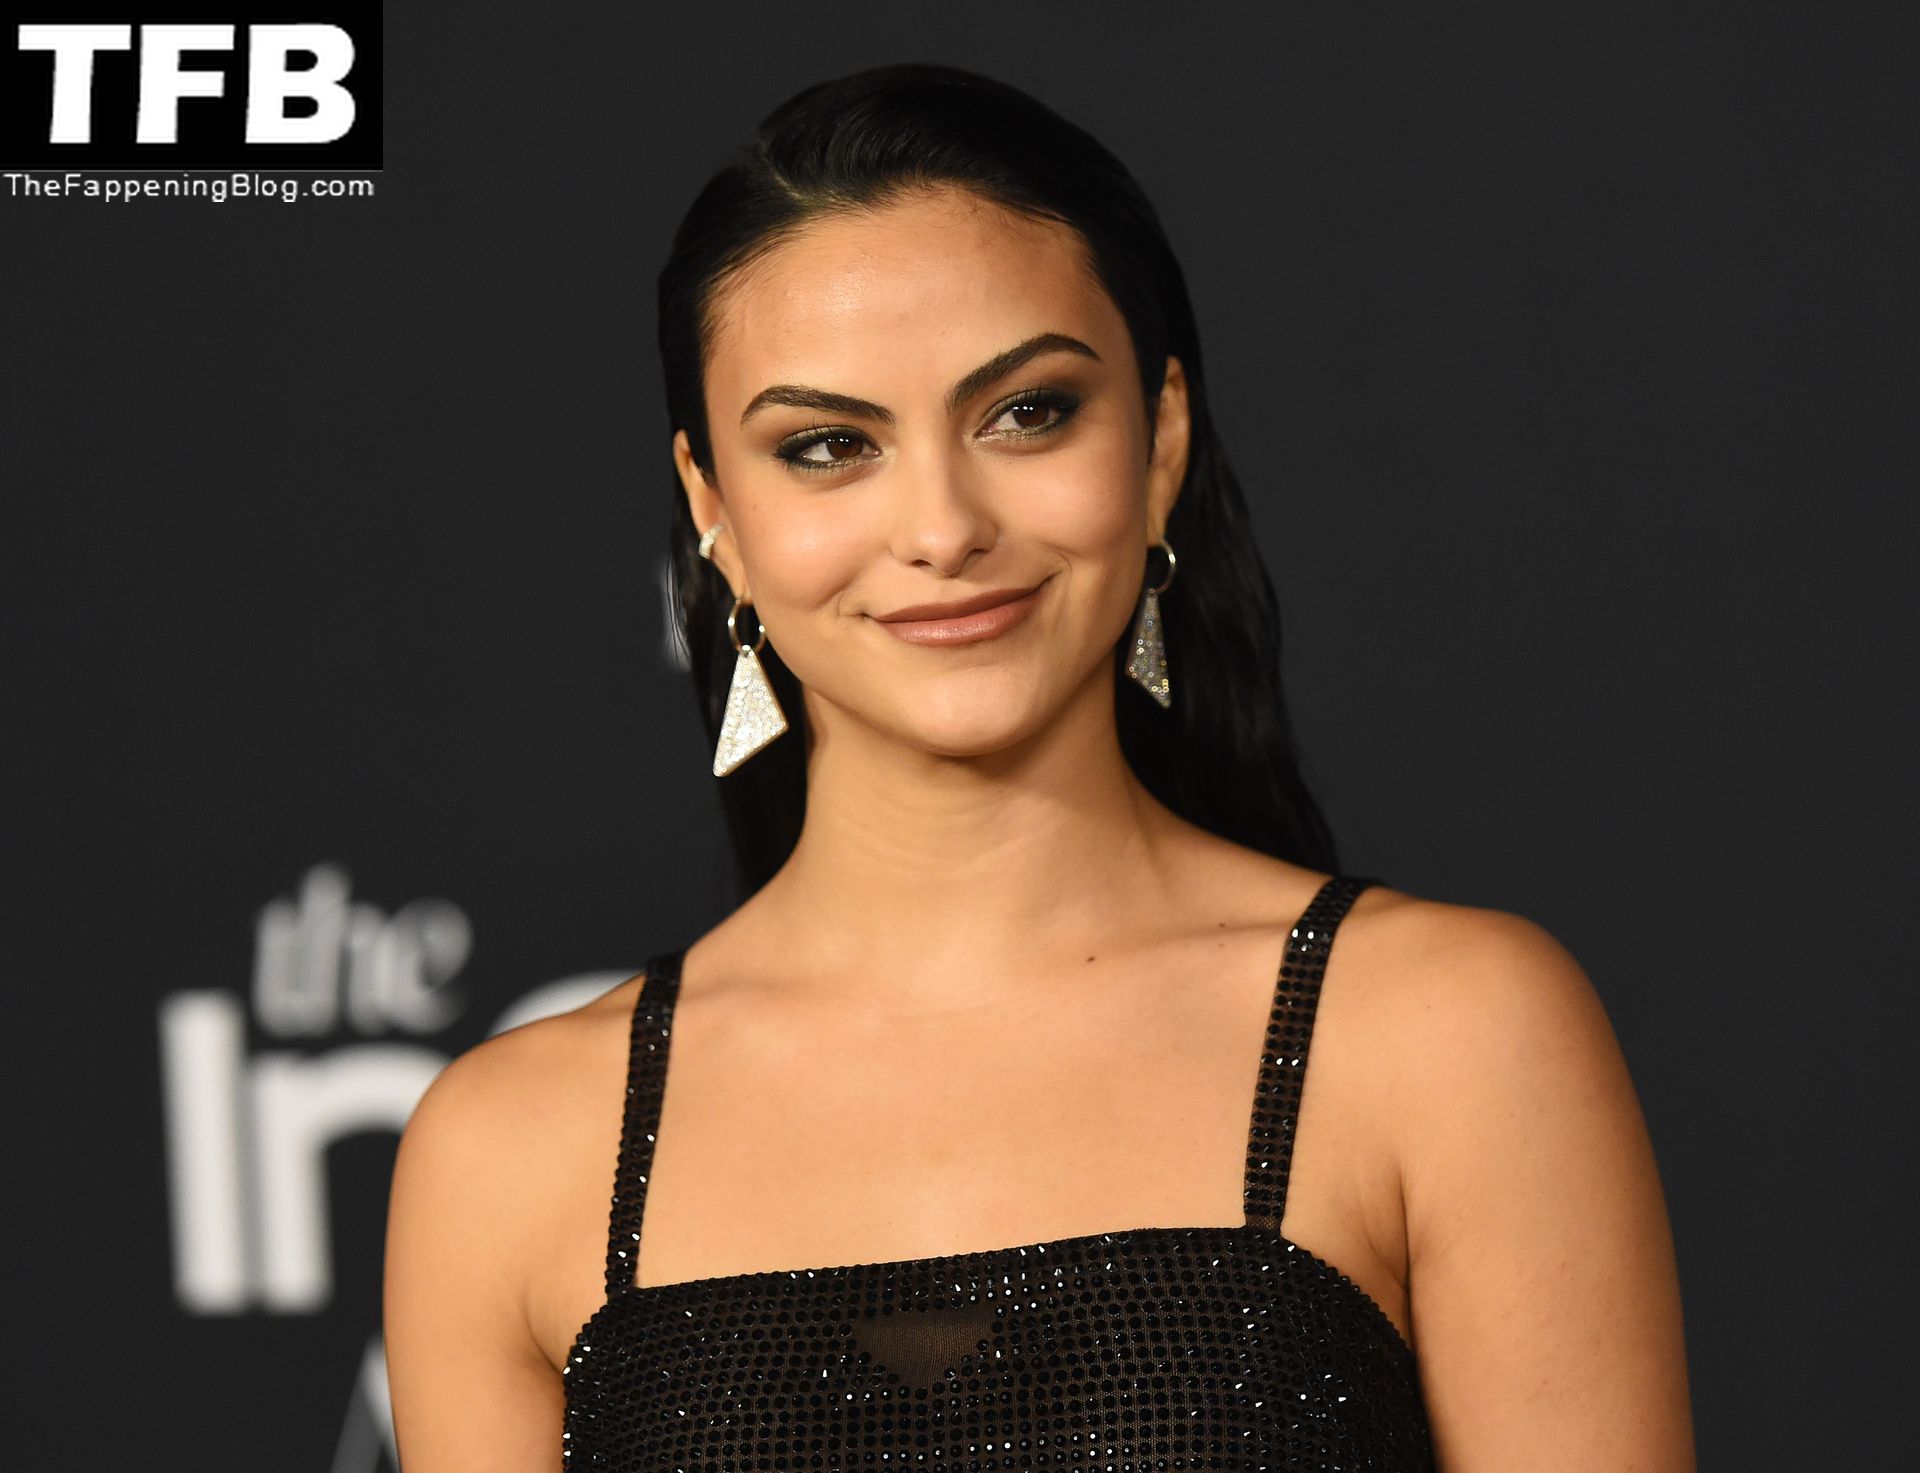 Camila-Mendes-See-Through-Tits-The-Fappening-Blog-66.jpg